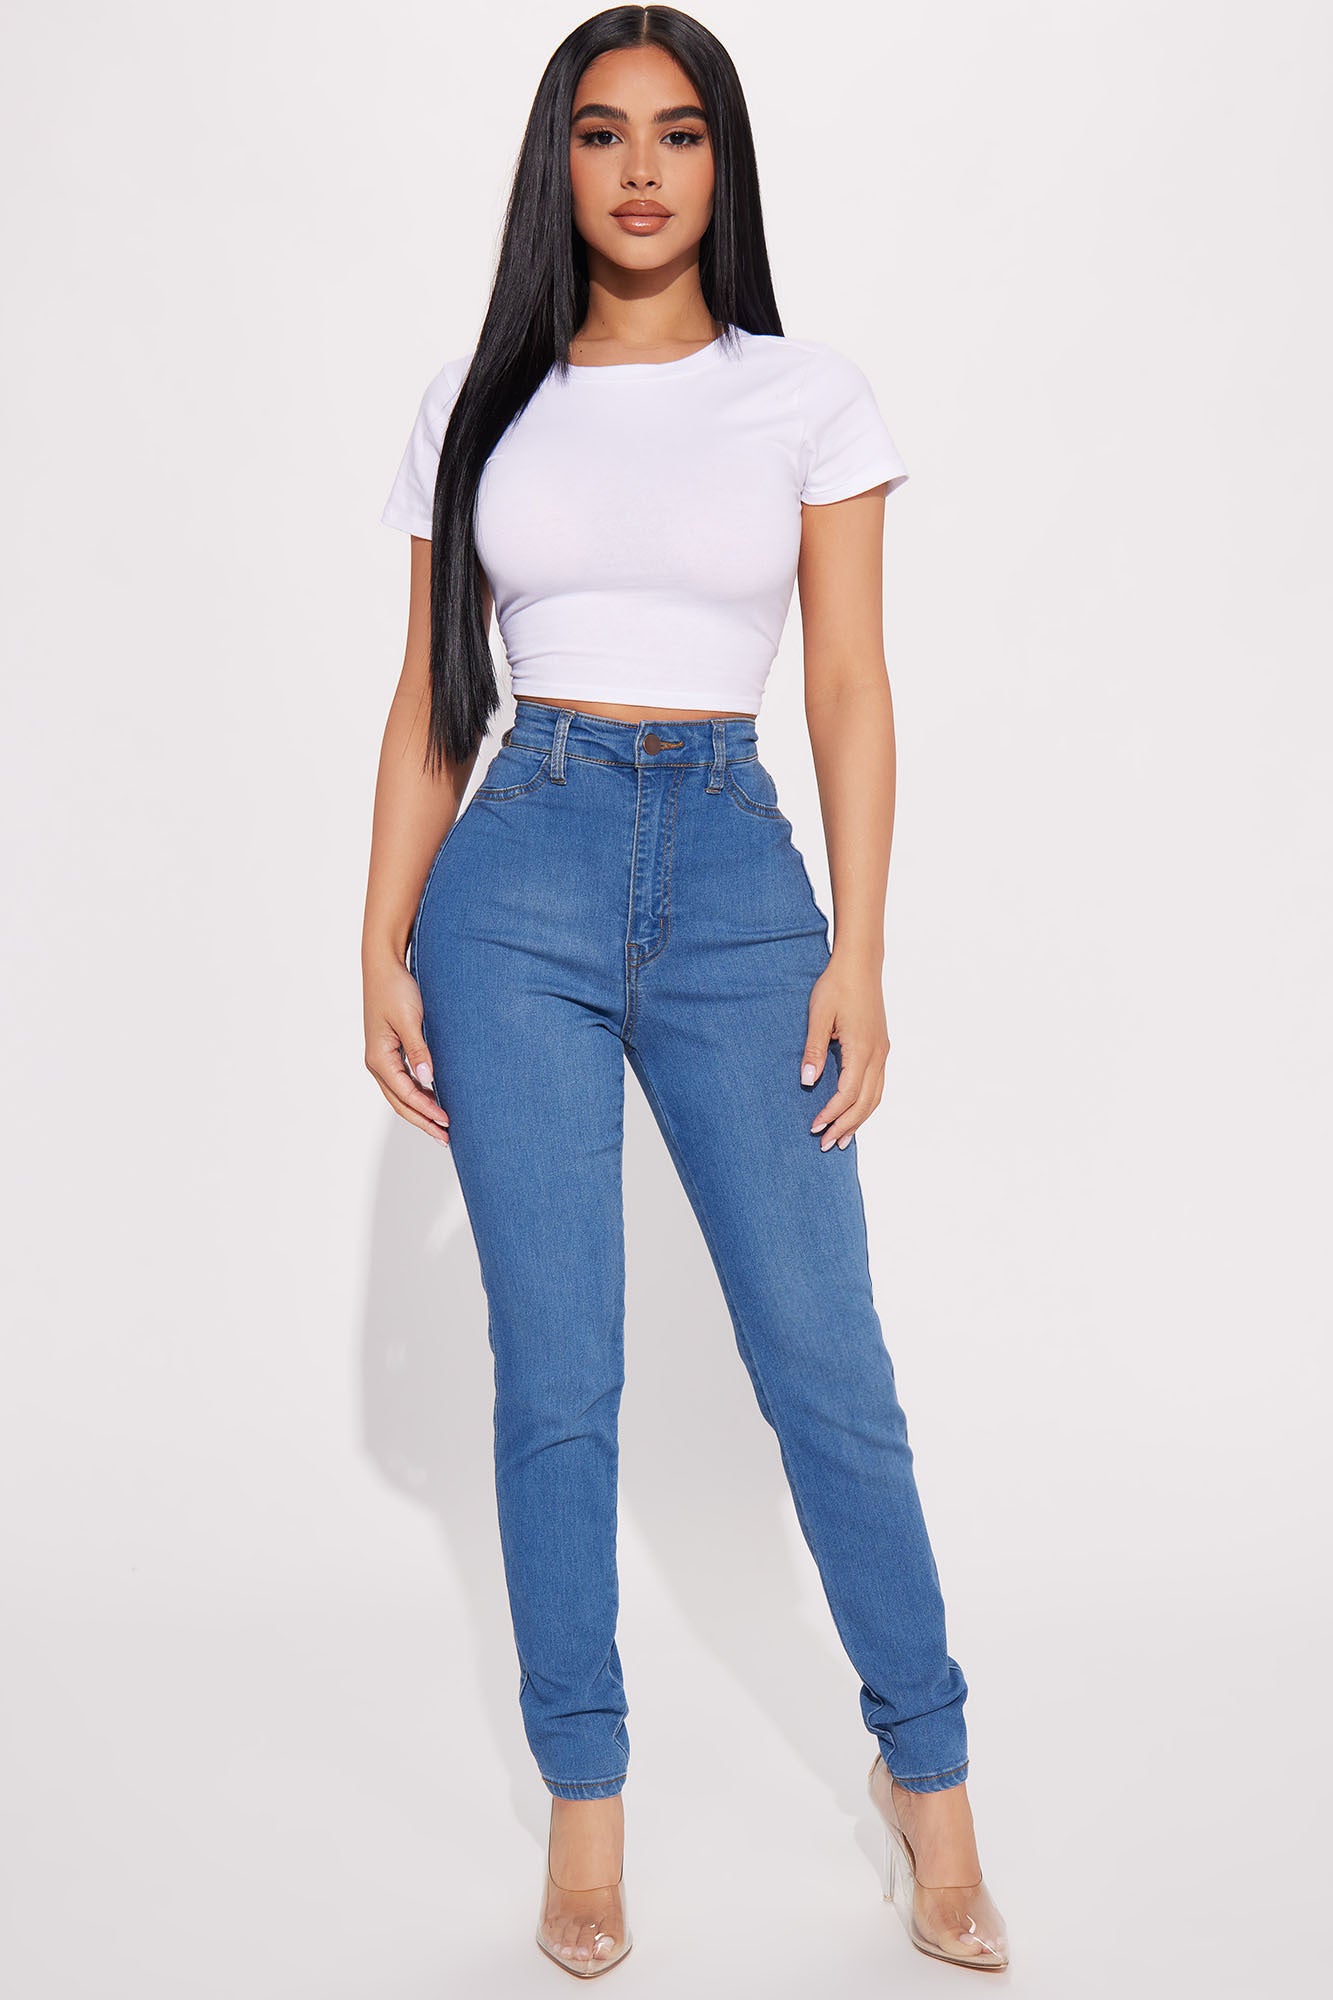 NMAGNES HIGH WAISTED SKINNY FIT JEANS, Blue